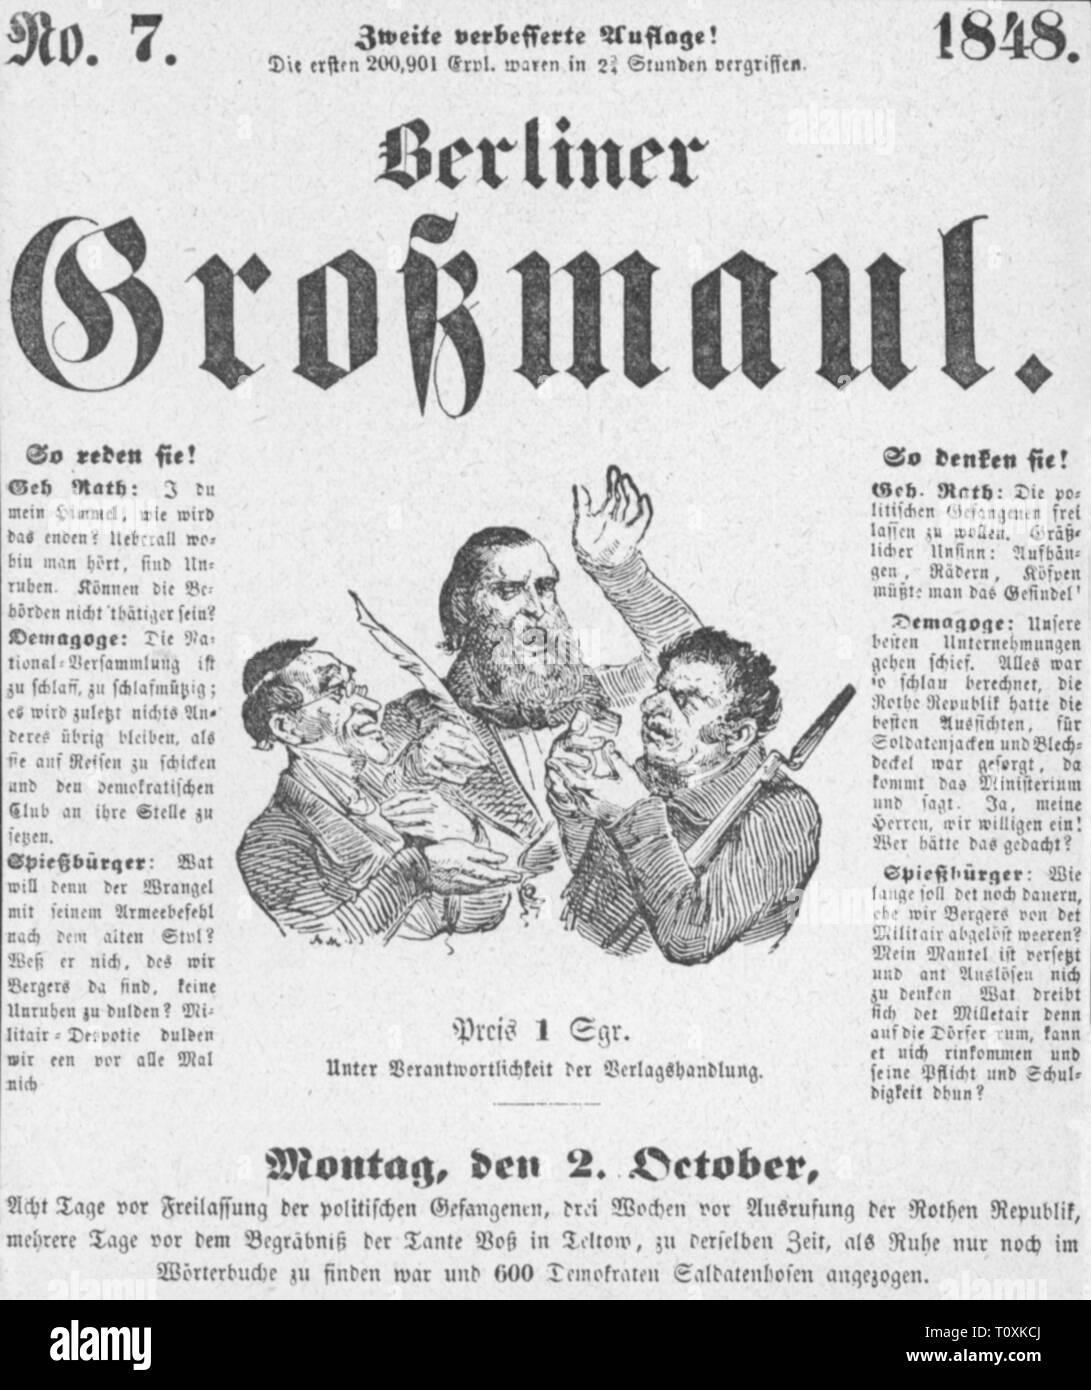 press / media, magazines, 'Berliner Grossmaul' (Berlin Loudmouth), front page, number 7, Berlin, 2.10.1848, Artist's Copyright has not to be cleared Stock Photo